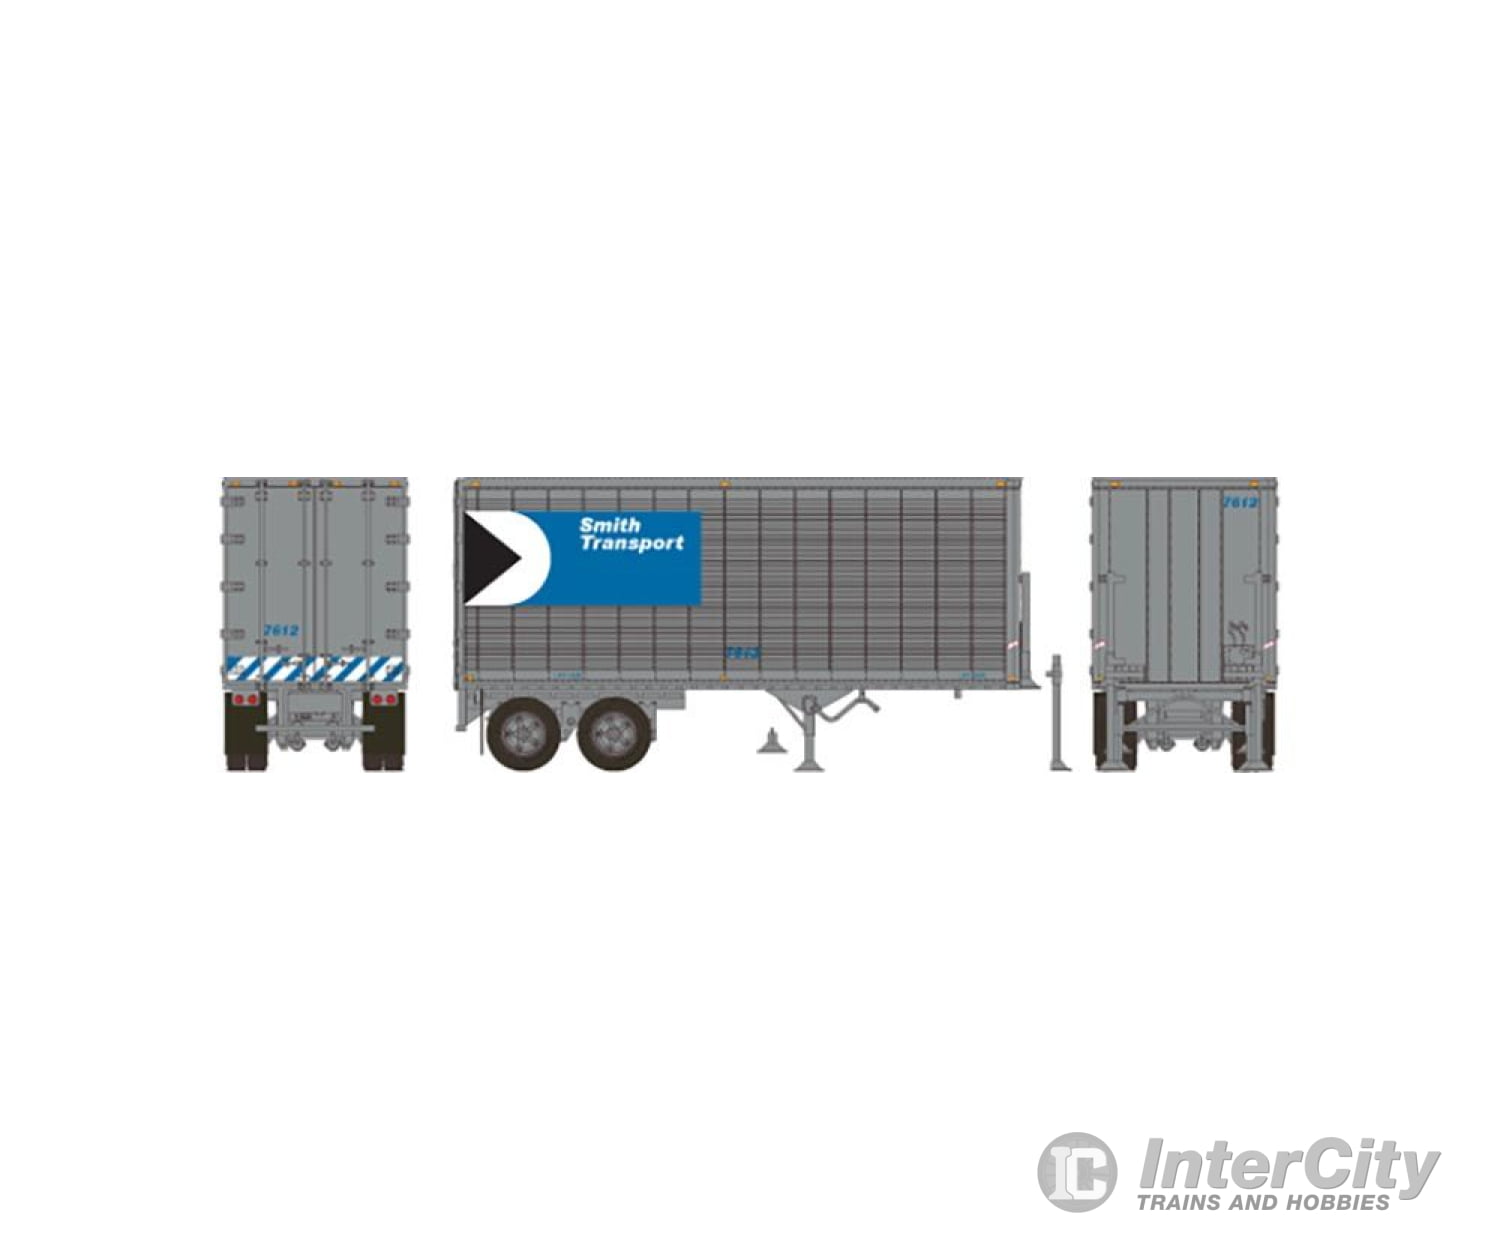 Rapido Trains Ho 403076 26’ Can - Car Dry Van Trailer - Assembled - - Smith Transport #7612